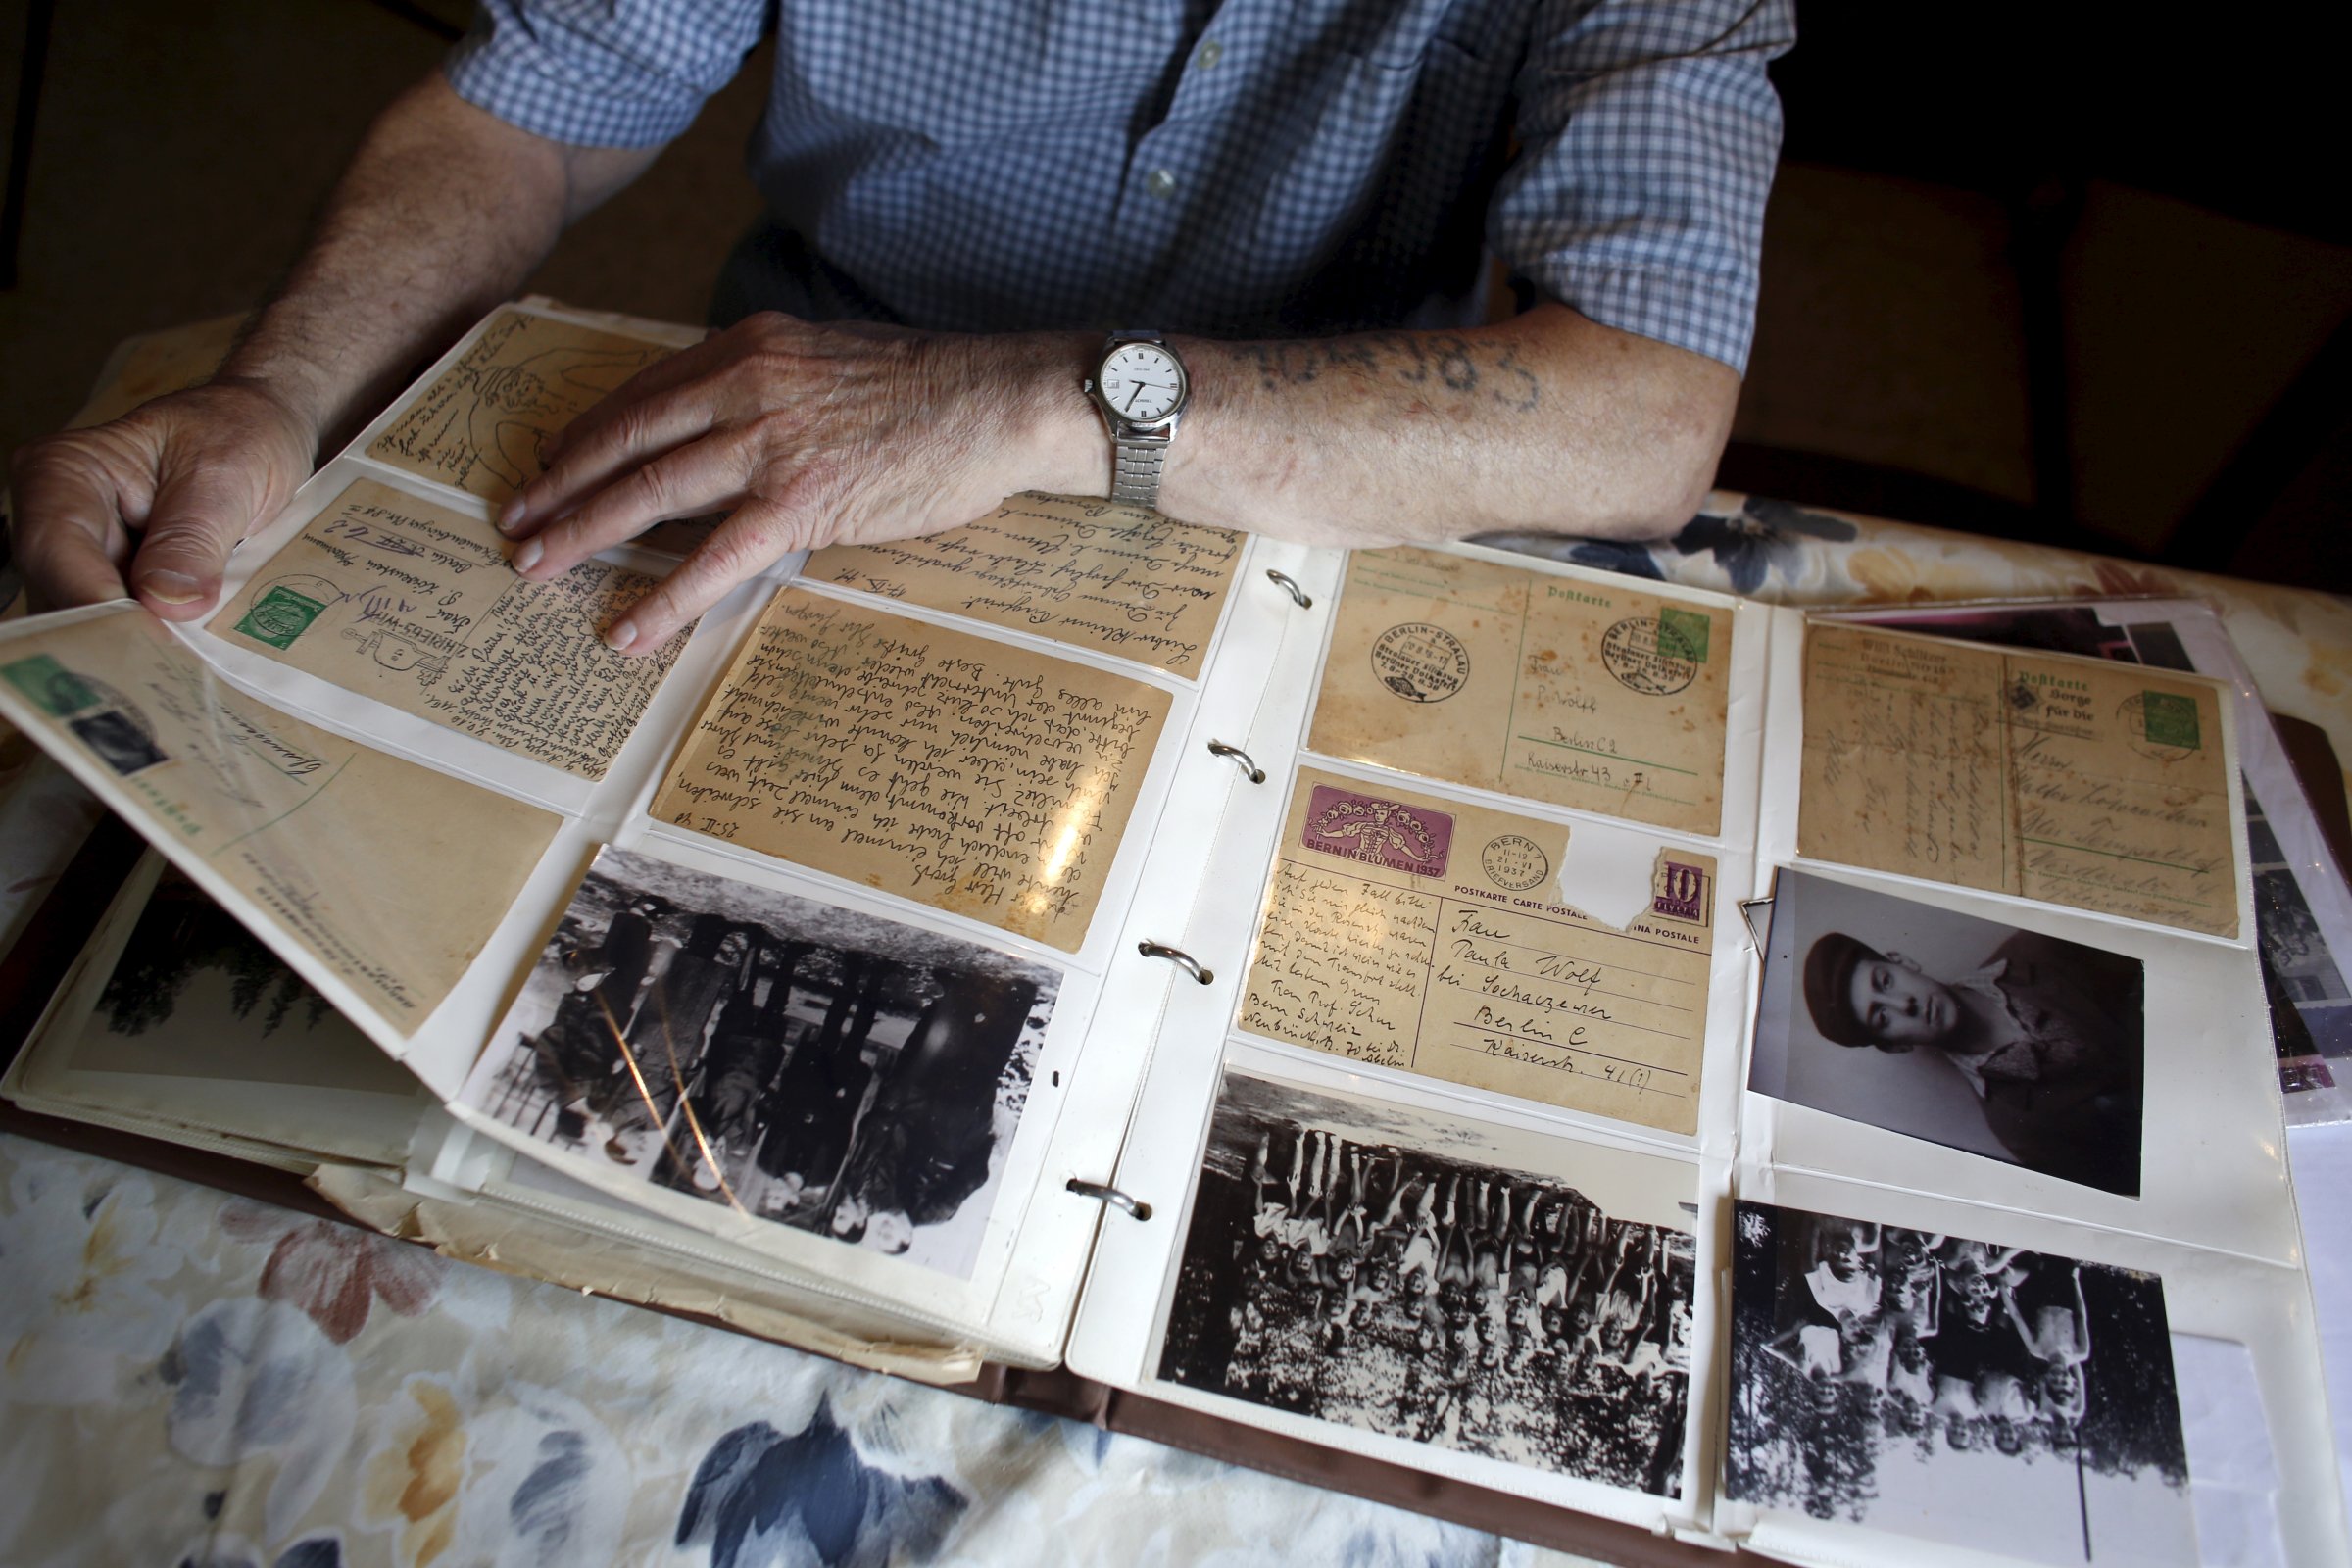 Holocaust survivor Israel Loewenstein, 91, looks at a photo album at his home in Yad Hana, Israel on April 6, 2016.